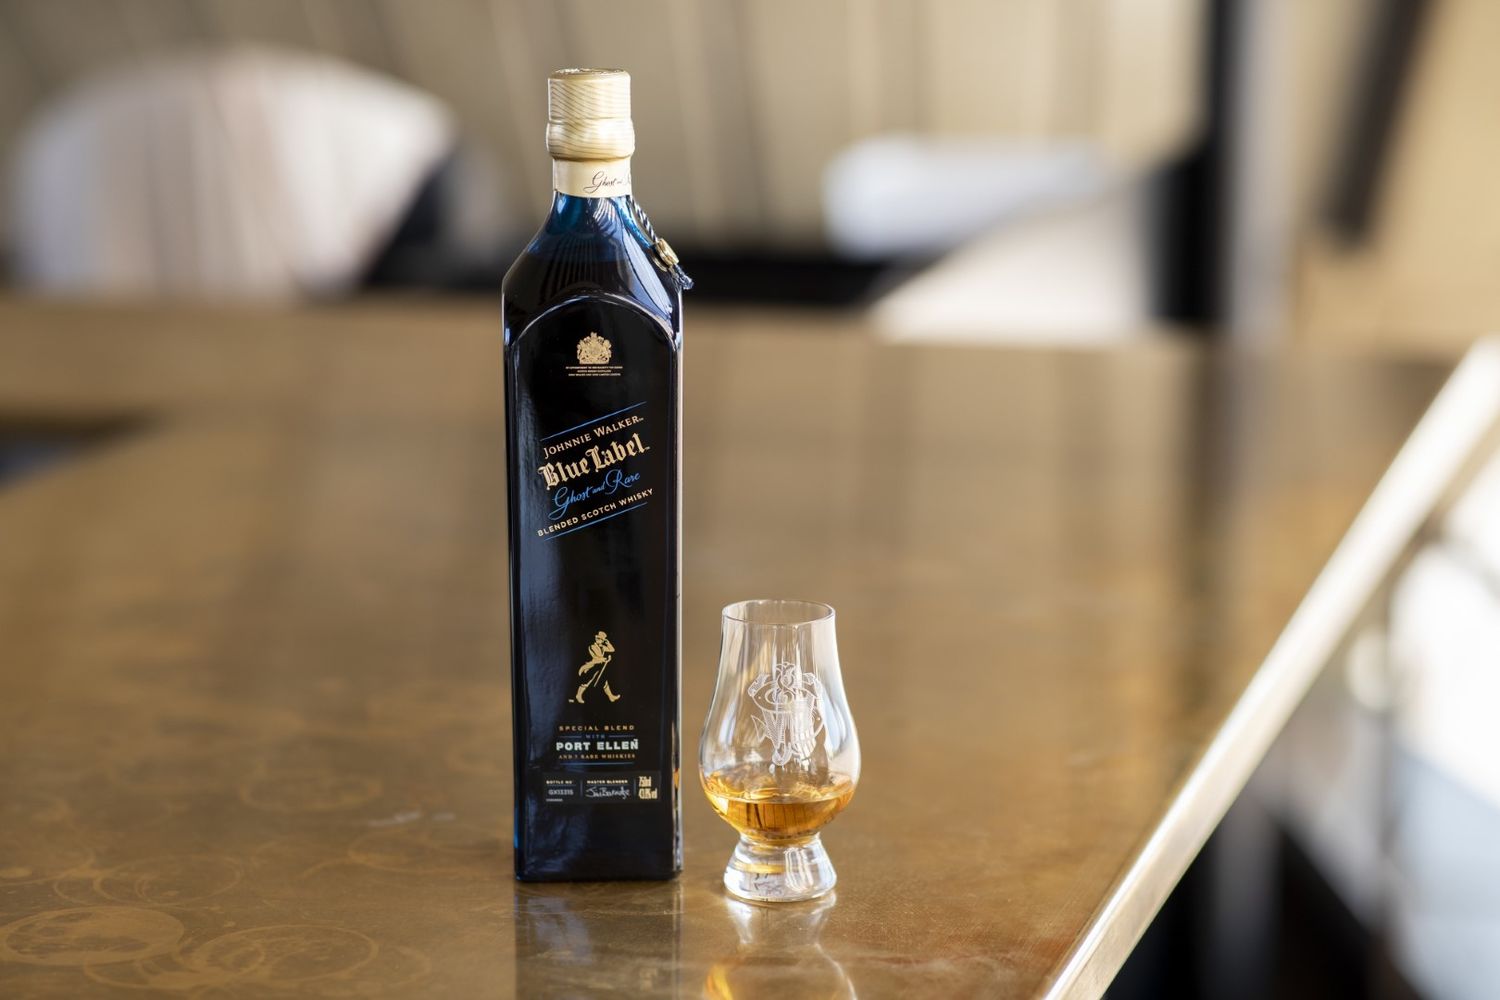 Johnnie Walker Blue Label Ghost and Rare Port Ellen has been crafted in small batches using three ‘Ghost whiskies’ and five rare malts from the Johnnie Walker Reserves